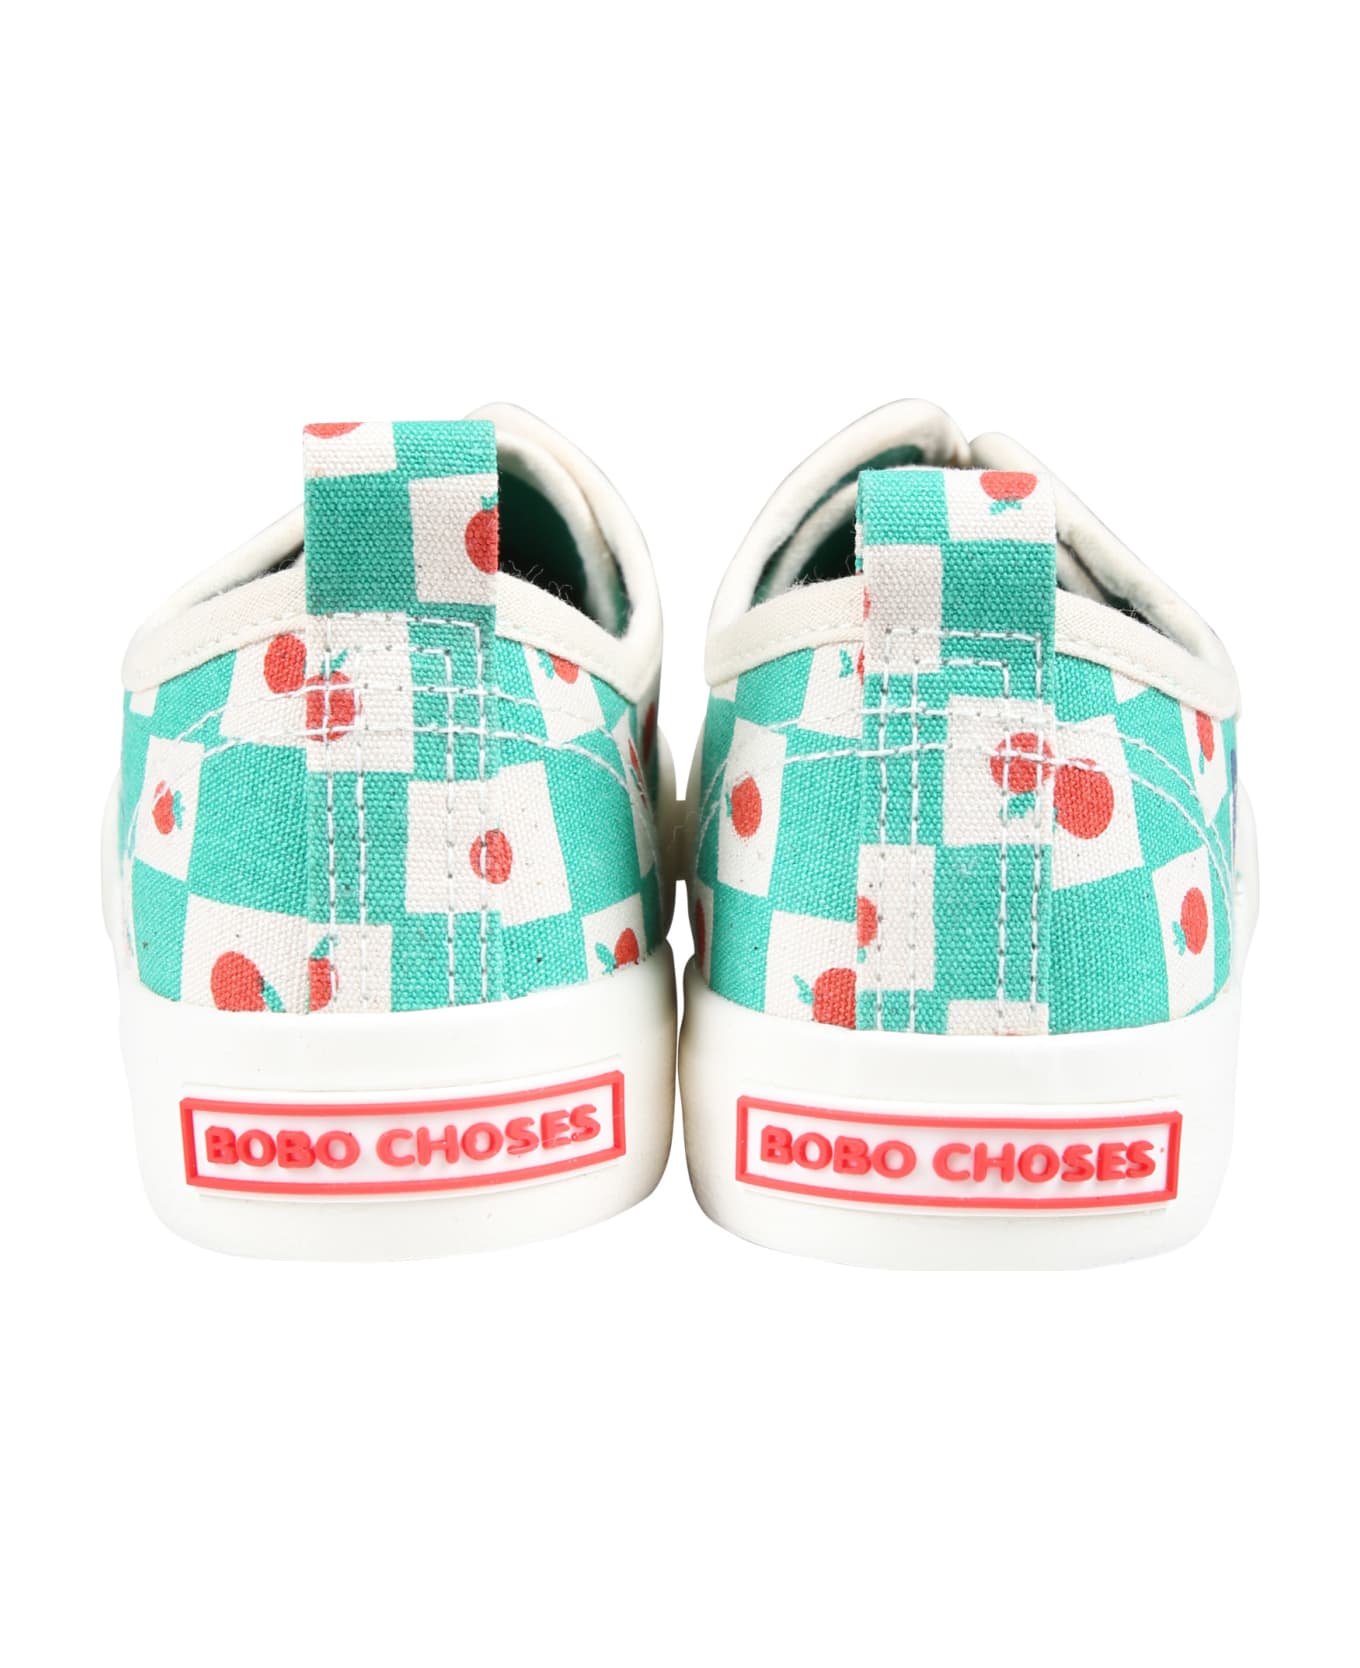 Bobo Choses Green Sneakers For Kids With Tomatoes - Green